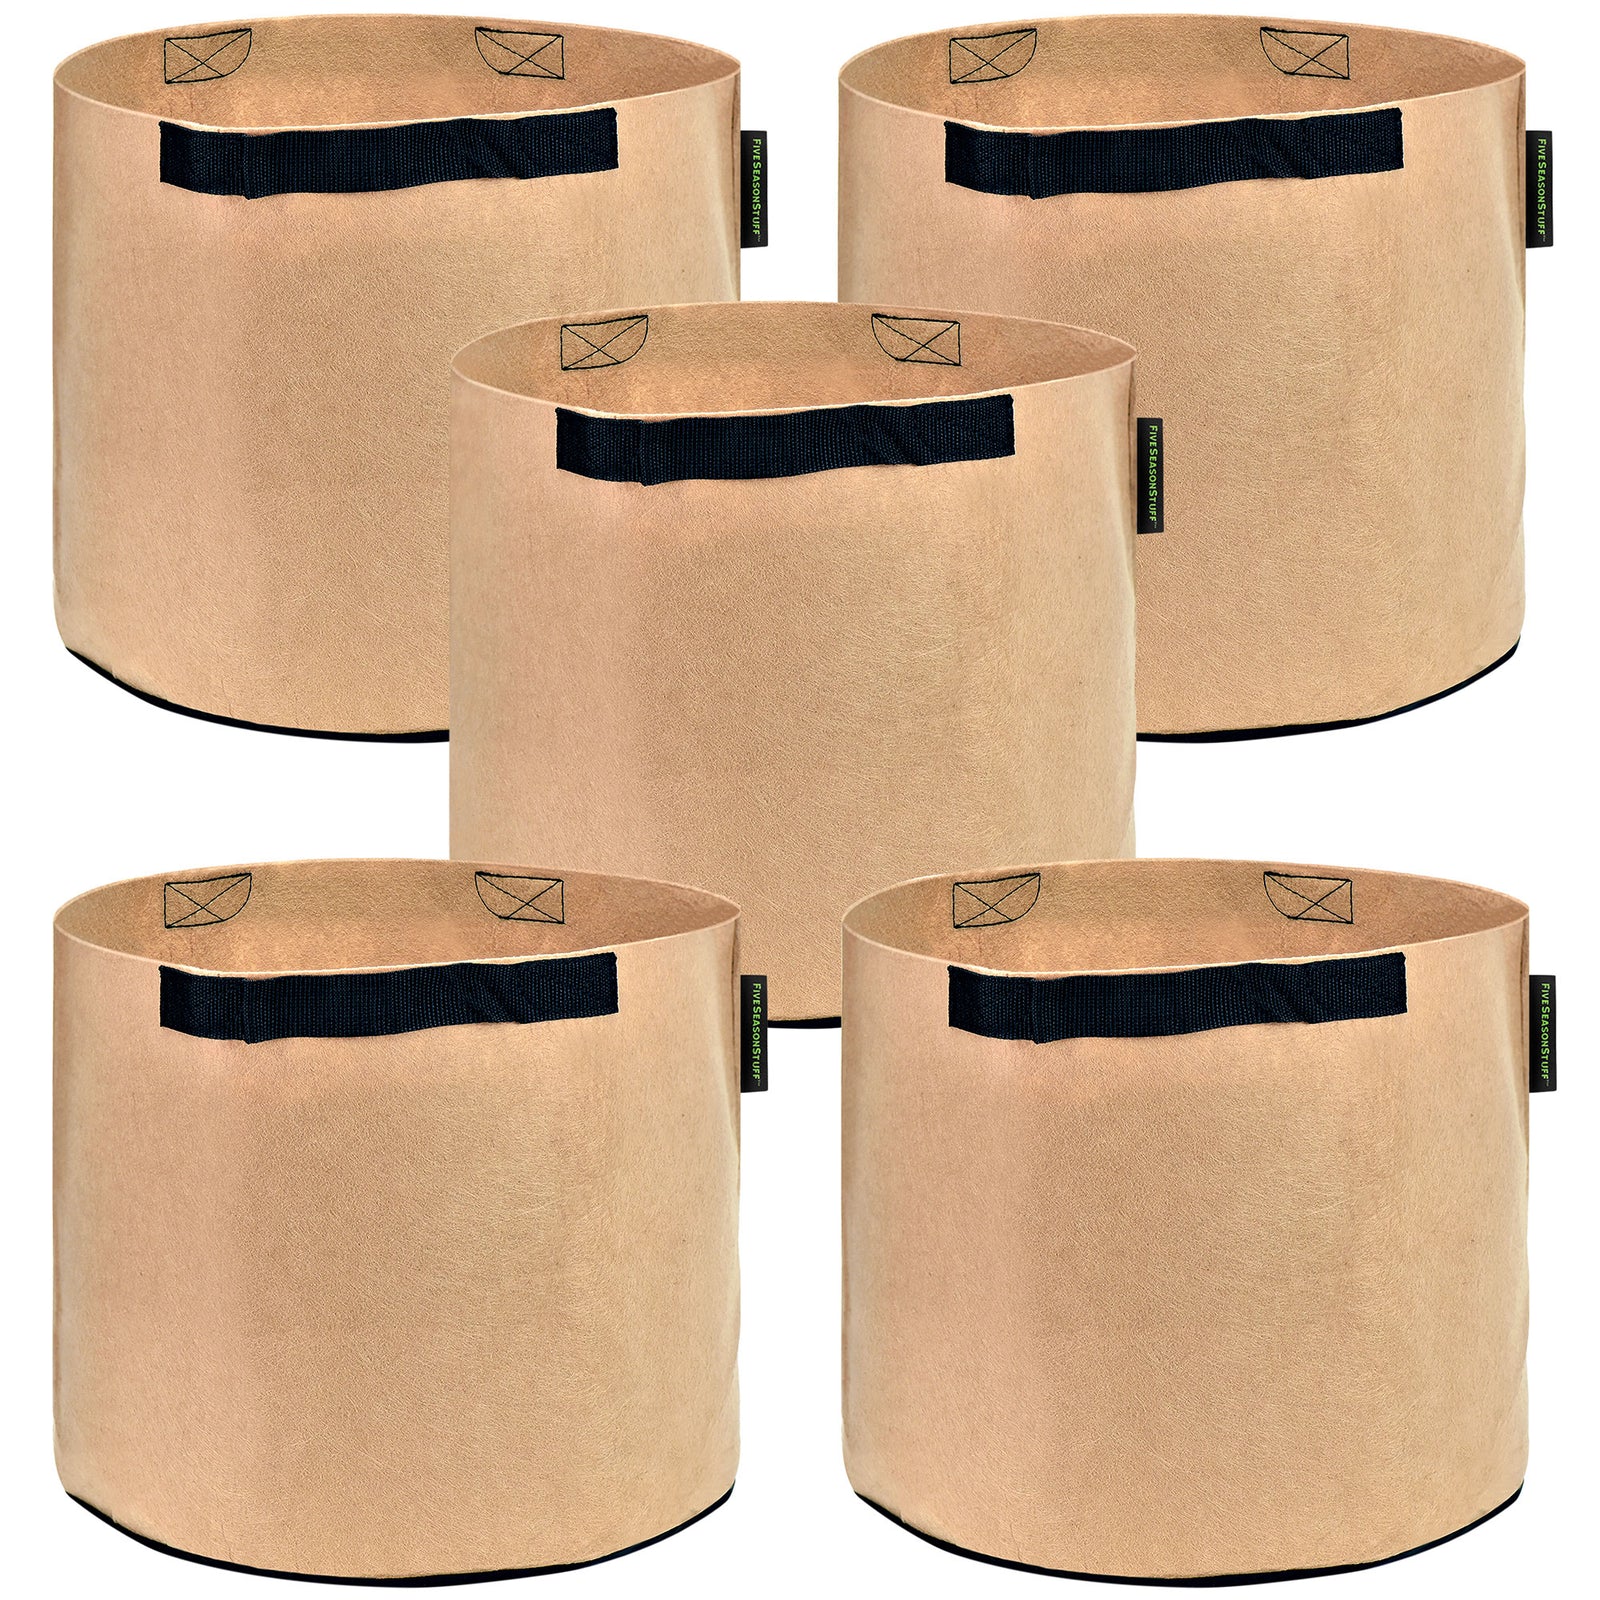 5 Pack 7 Gallons Grow Bags - Breathable Fabric Pots for Healthier Plants Vegetables Flowers – Heavy Duty Thick Containers with Sturdy Handles - Aeration Planters for Smart Gardening (Khaki)